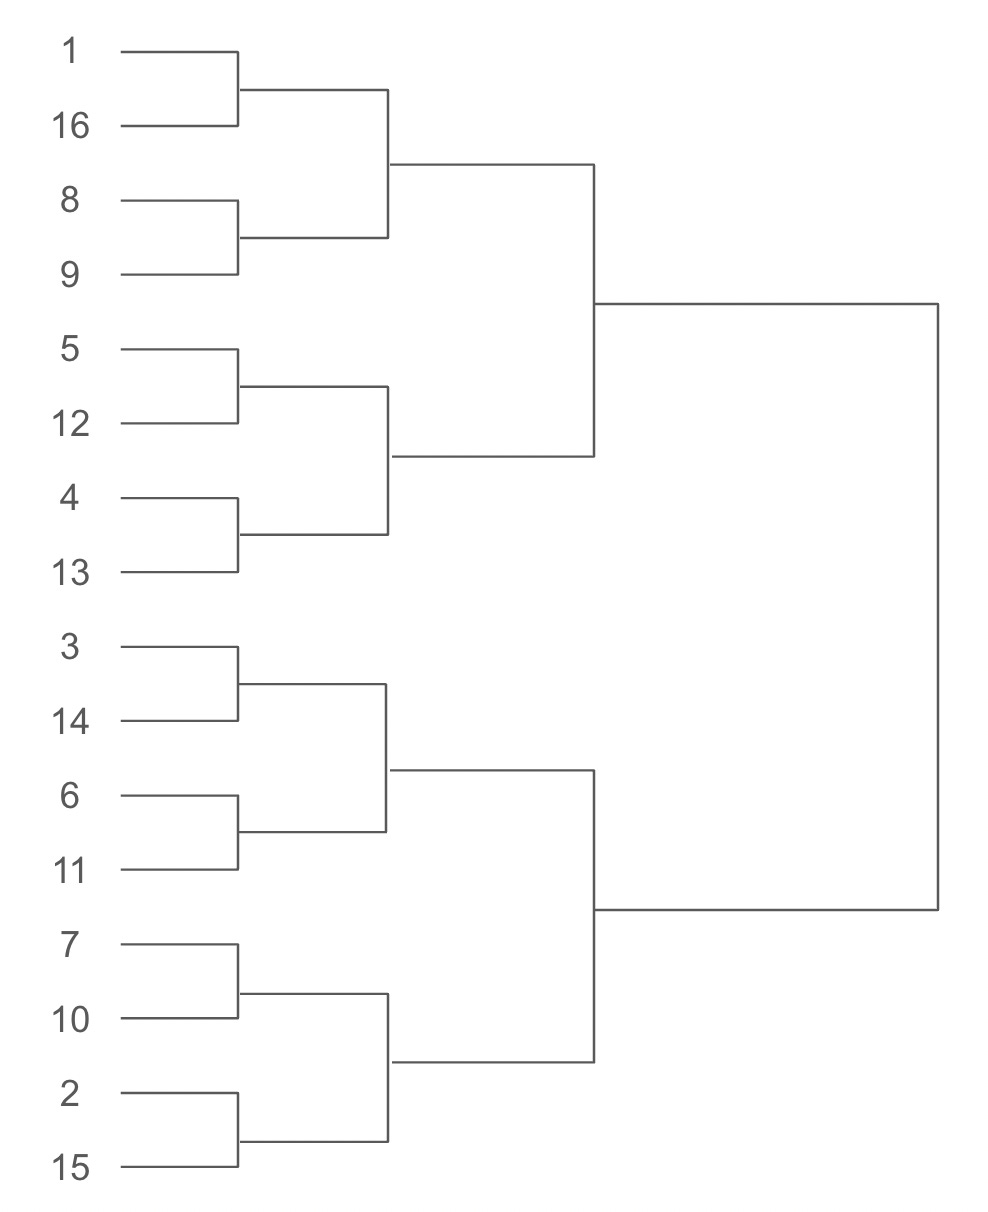 A standard 16-team bracket, with seeds numbered 1 through 16.